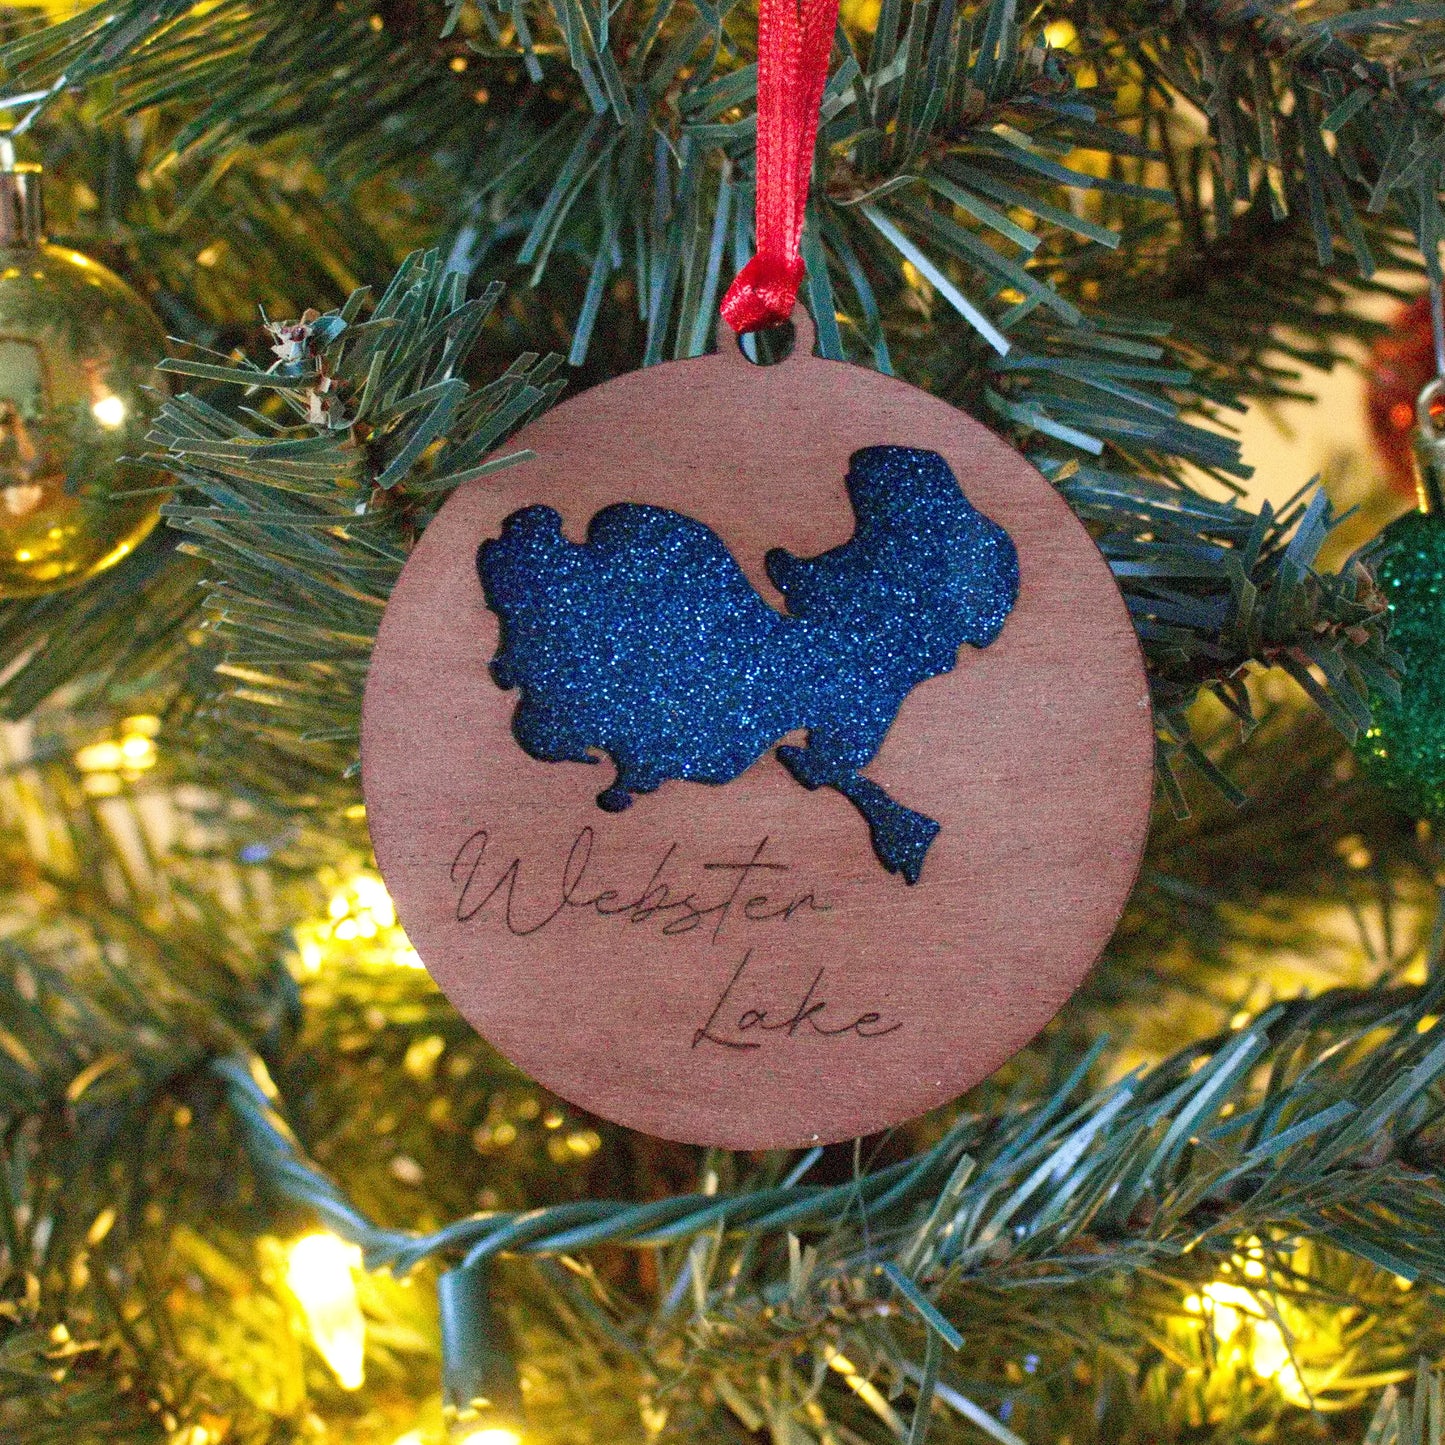 Webster Lake Christmas ornament for the family to remember time spent together on the lake. Made out of wood and acrylic with attention to detail. This is something you will love.